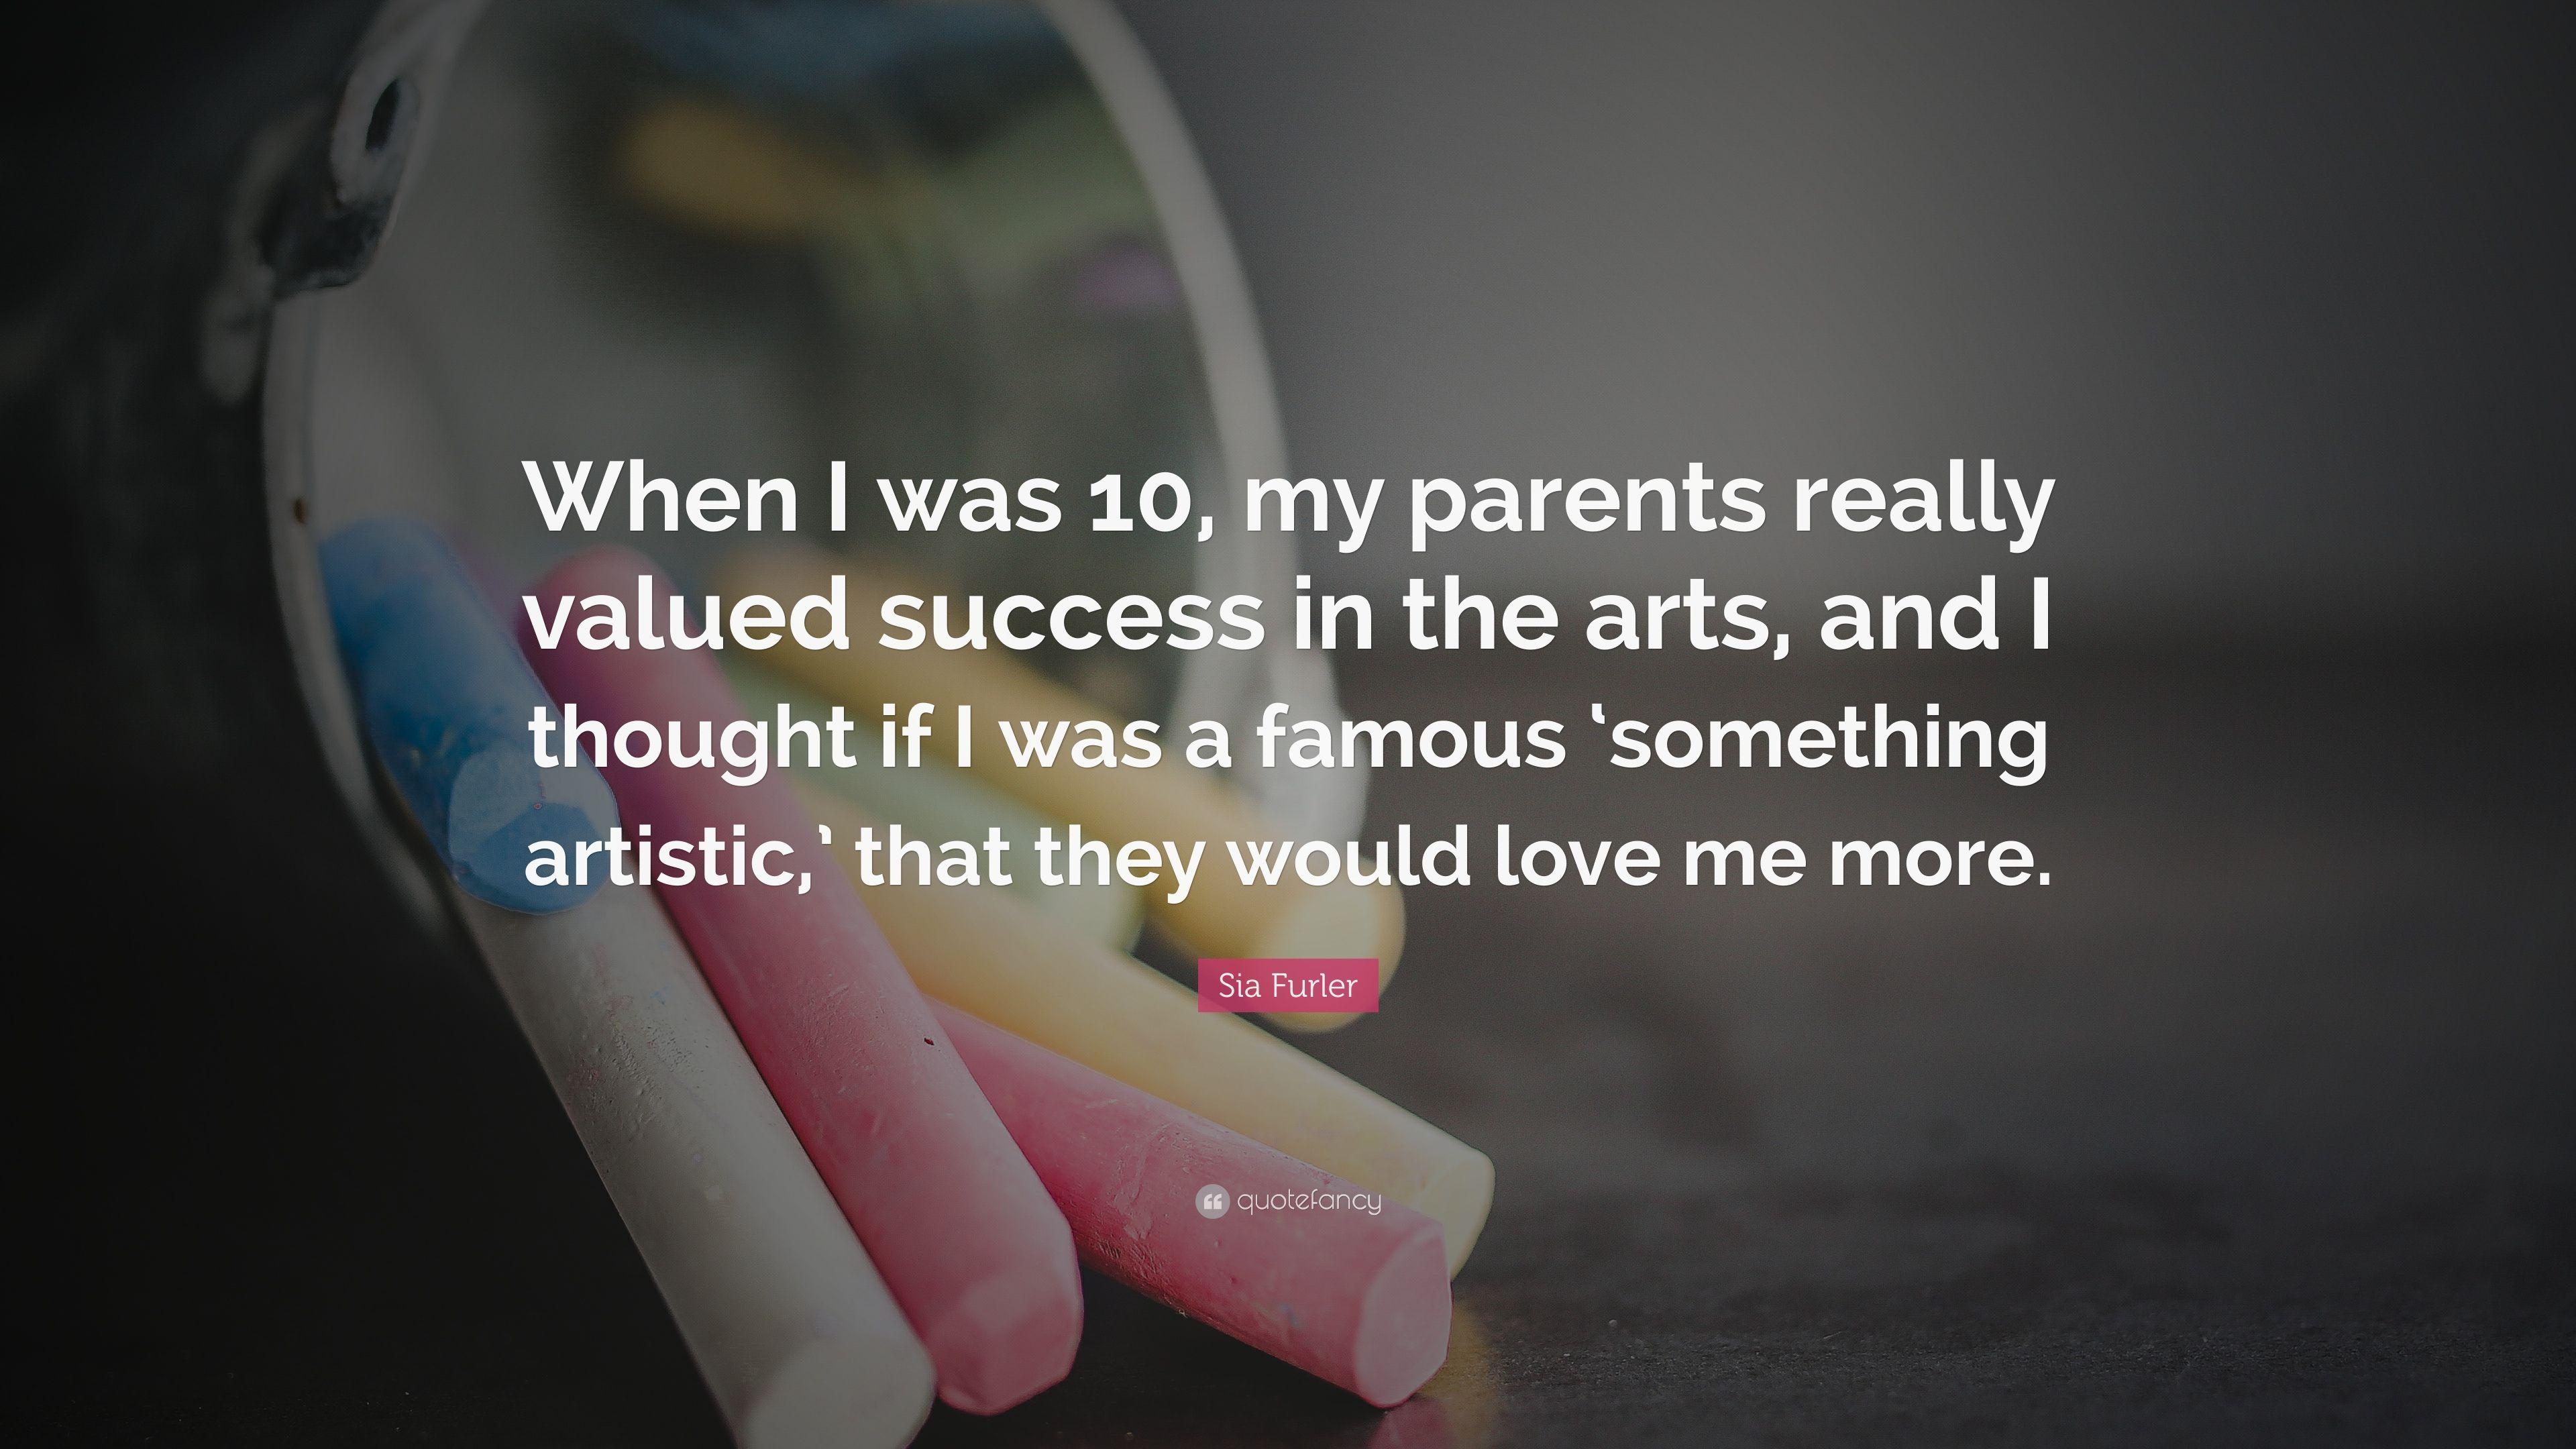 Sia Furler Quote: “When I was my parents really valued success